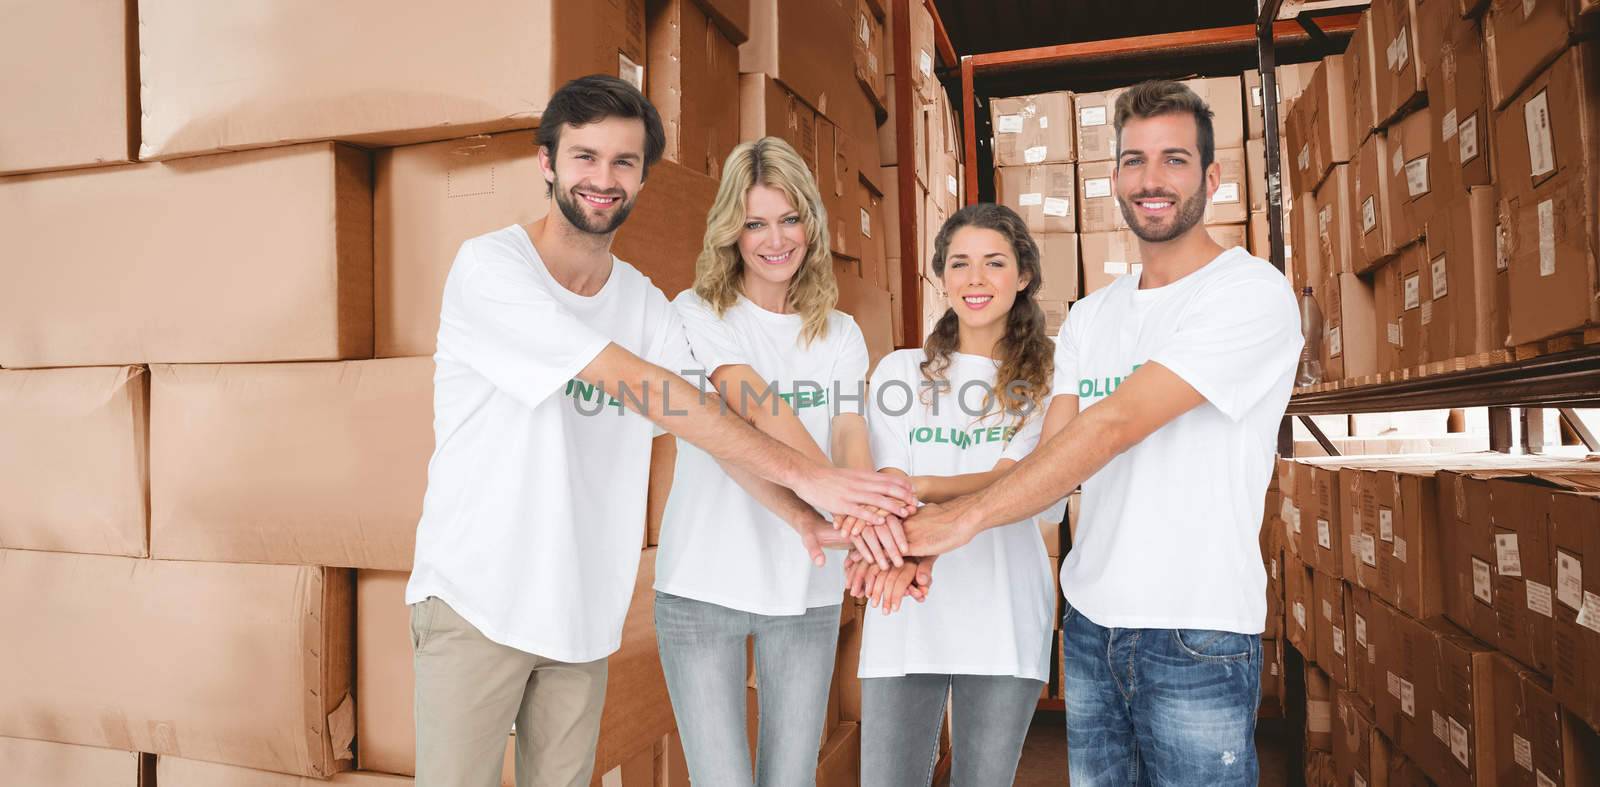 Group portrait of happy volunteers with hands together against shelves with boxes in warehouse